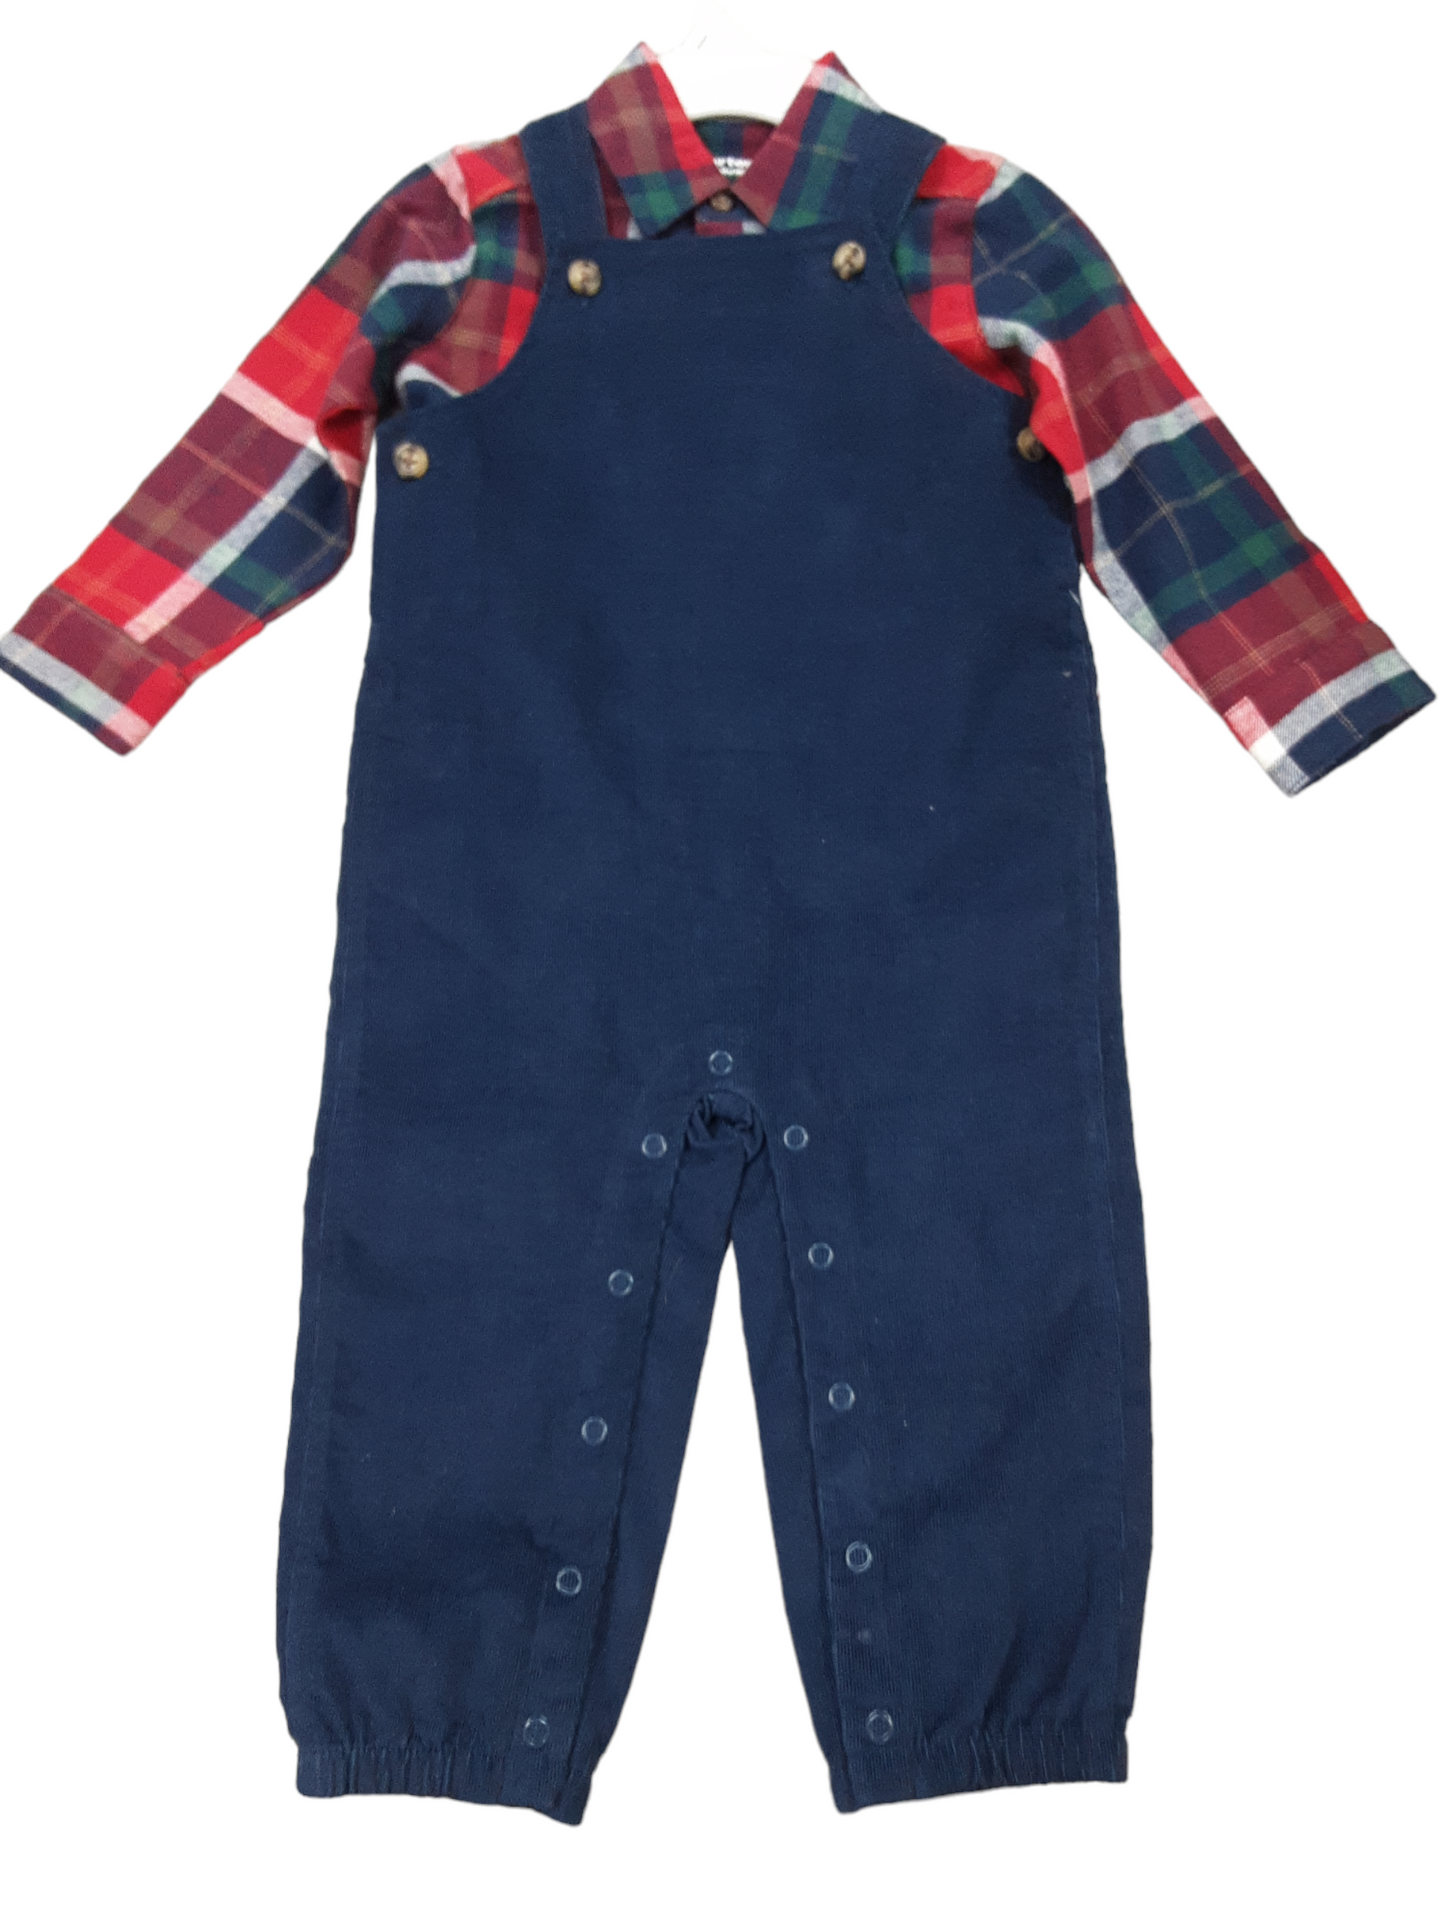 Plaid overall set size 18months